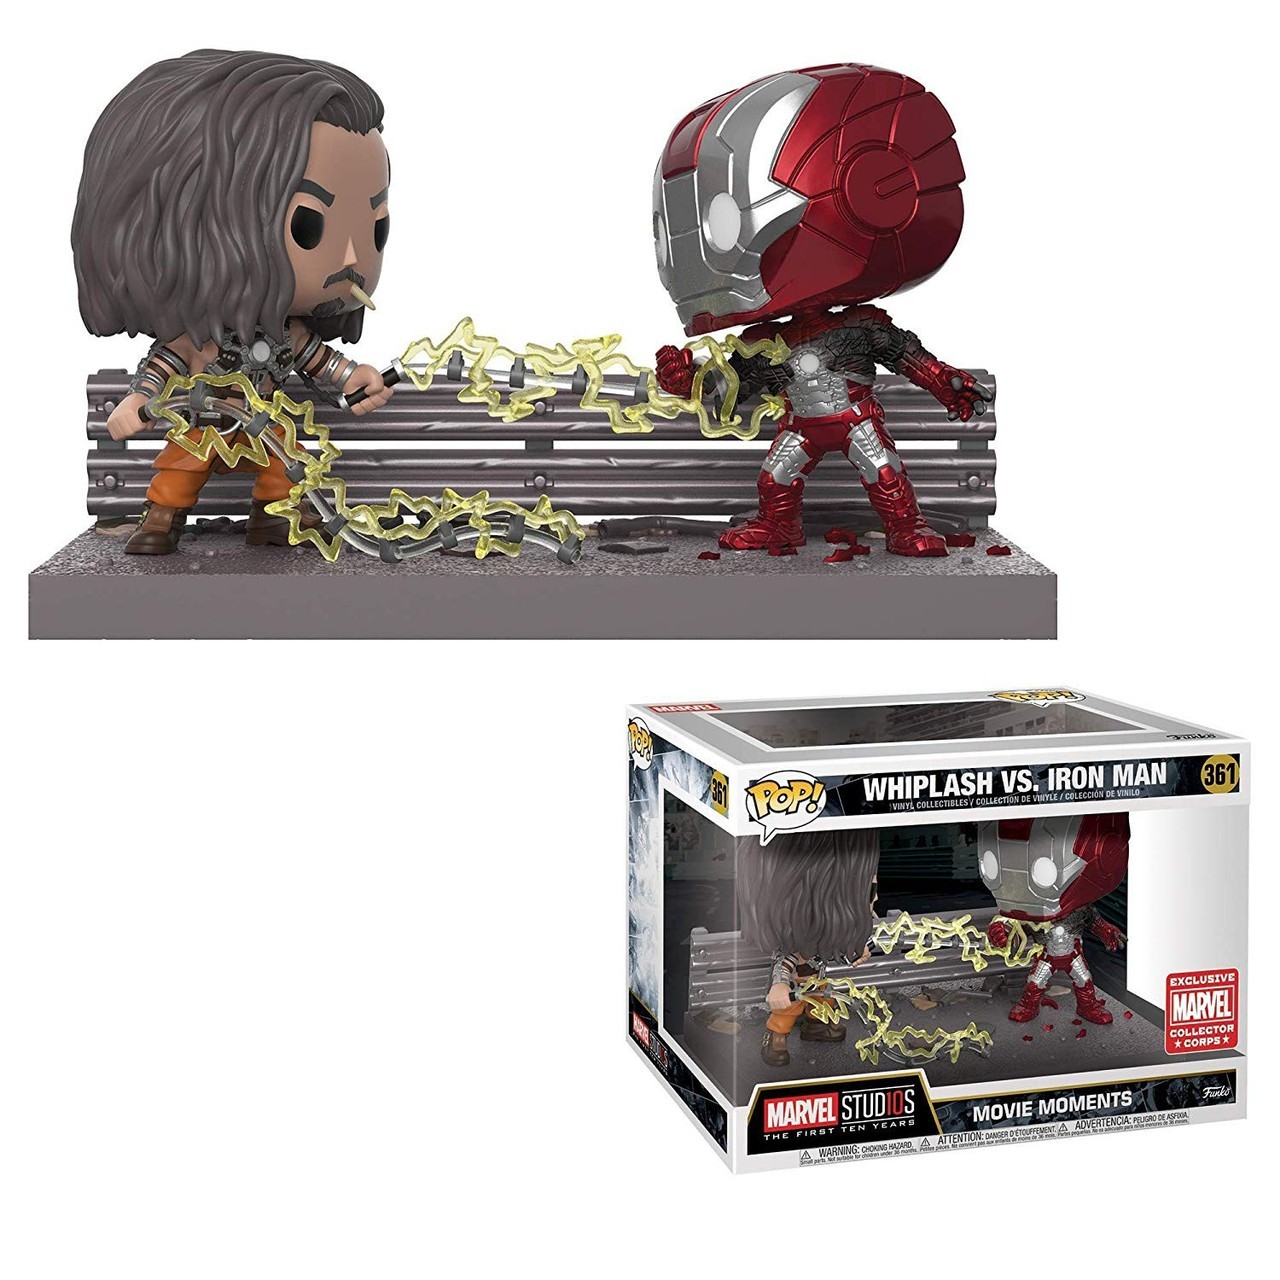 Marvel Iron Man 2 Movie Moments #361 Whiplash Vs Iron Man Marvel Collector Corps Exclusive Vinyl Collectibles Pop